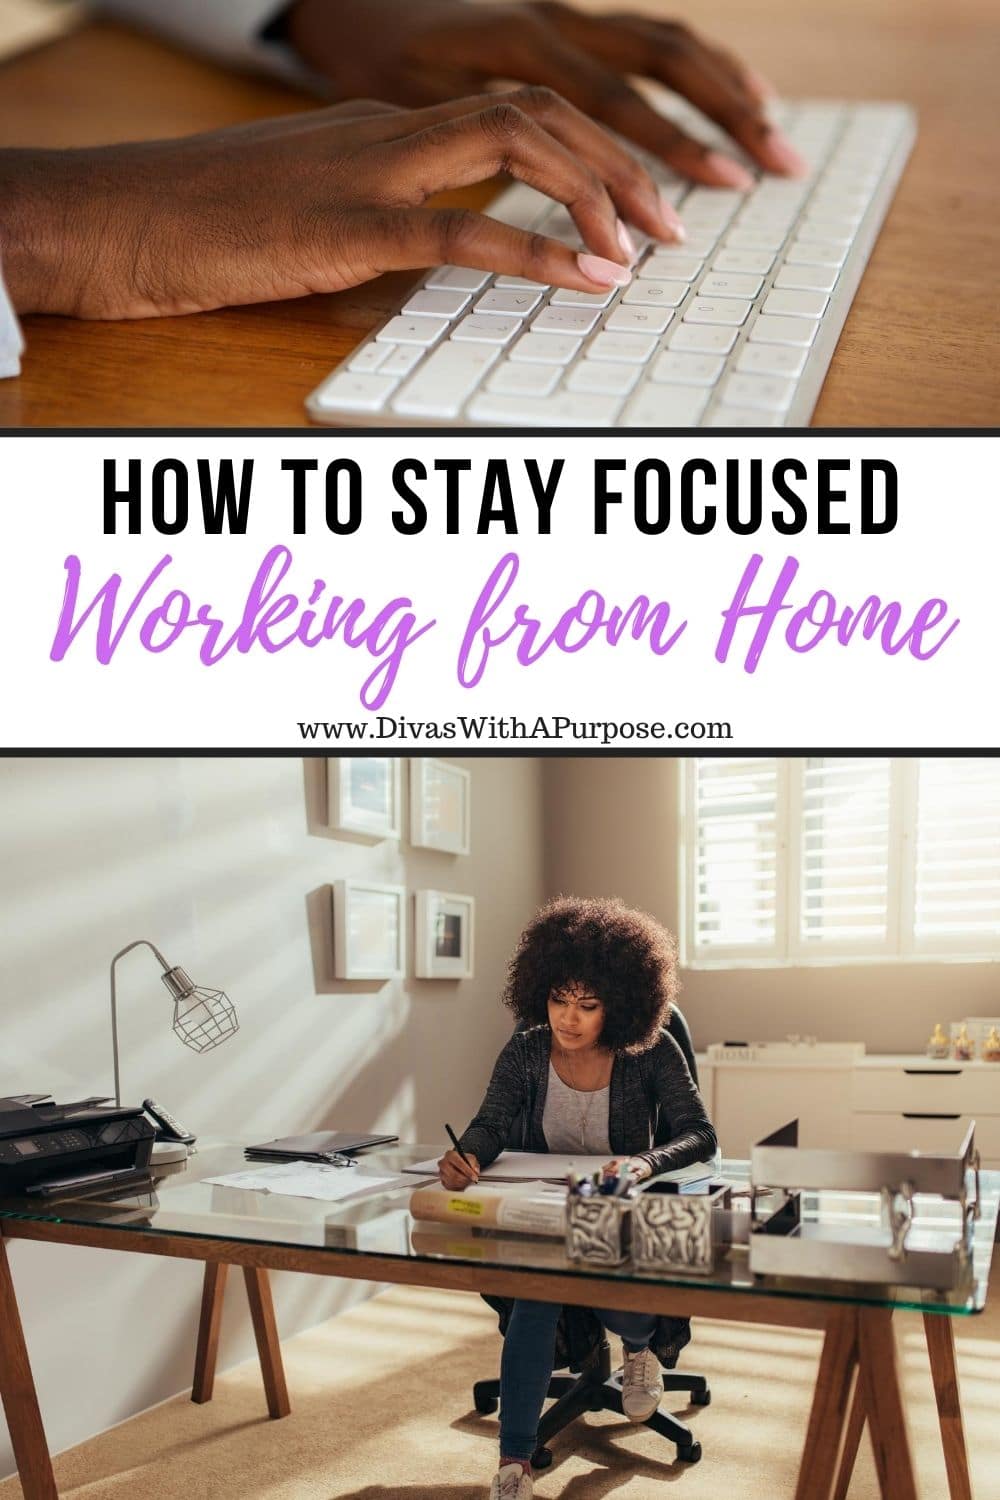 Working from home is exciting, but it can be overwhelming if you struggle with focus or discipline. Here are 6  ways to help you stay focused. #productivity #stayfocused #workfromhome